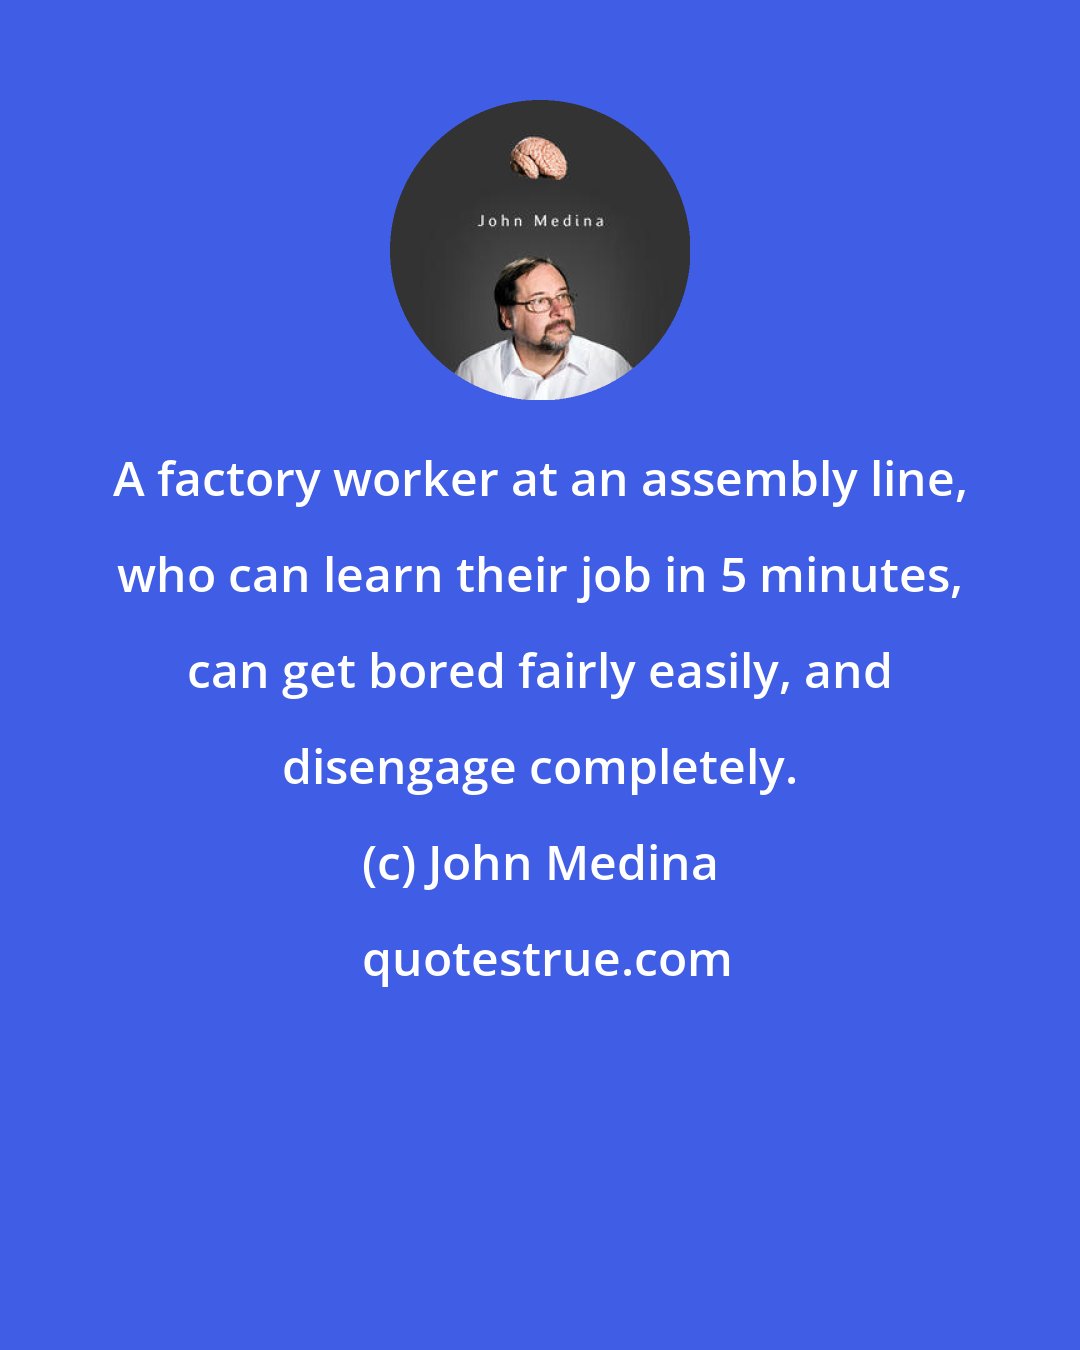 John Medina: A factory worker at an assembly line, who can learn their job in 5 minutes, can get bored fairly easily, and disengage completely.